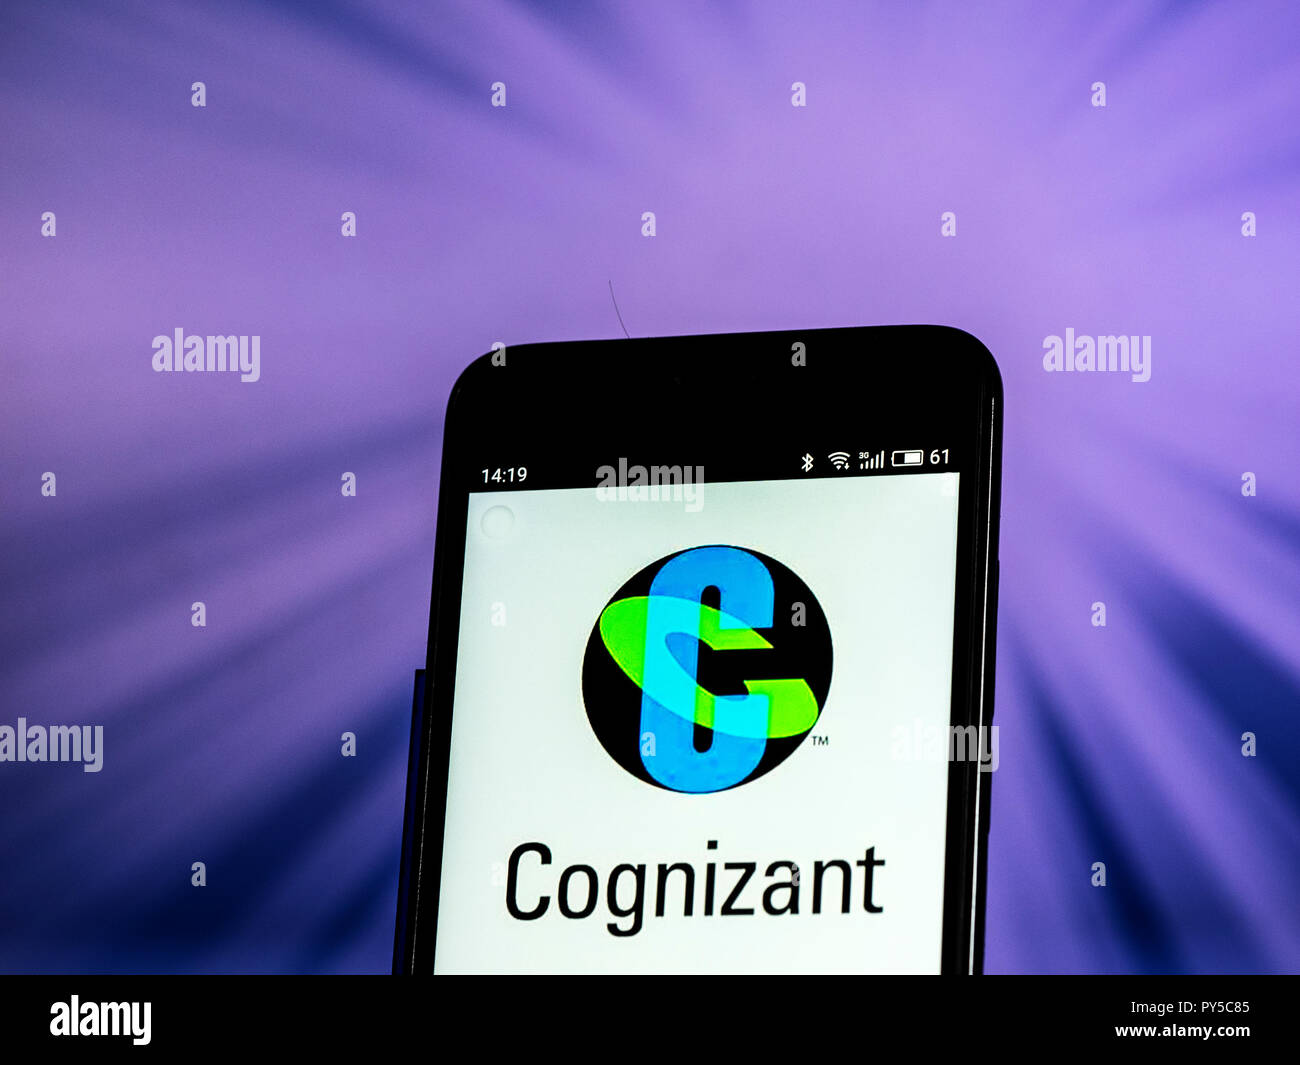 Cognizant Corporation logo seen displayed on smart phone. Cognizant is a multinational corporation that provides IT services, including digital, technology, consulting, and operations services. Stock Photo